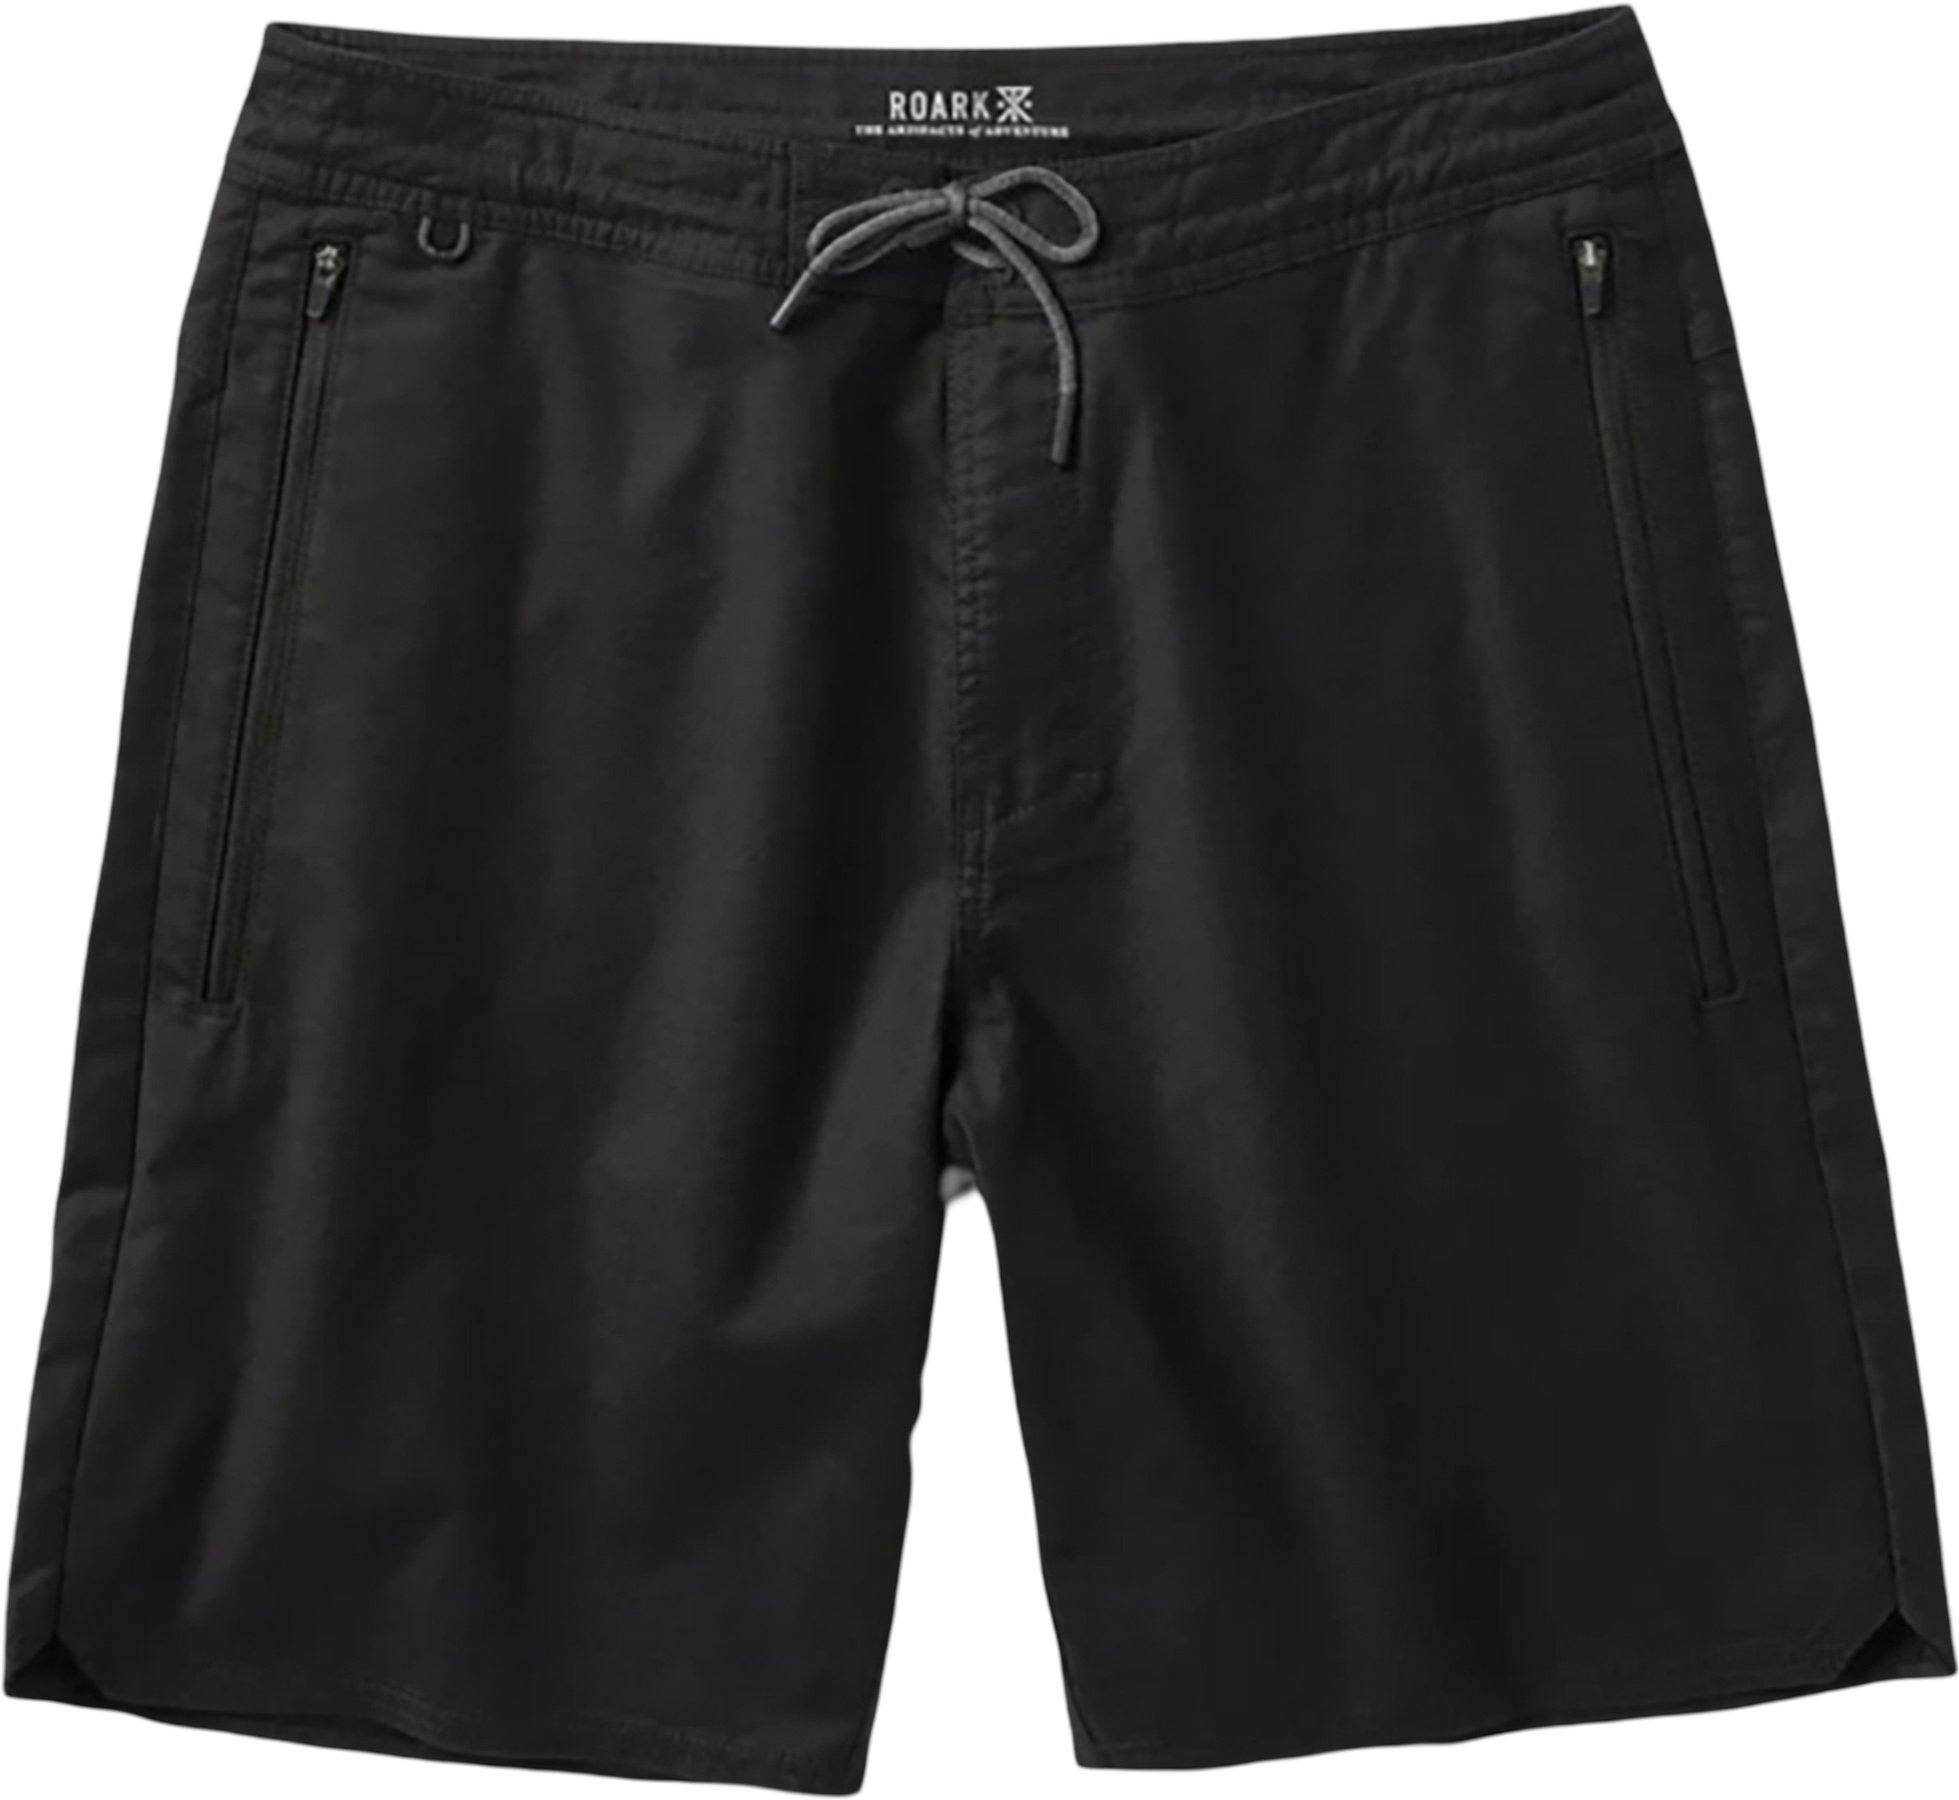 Product image for Layover Shorts 19" - Men's